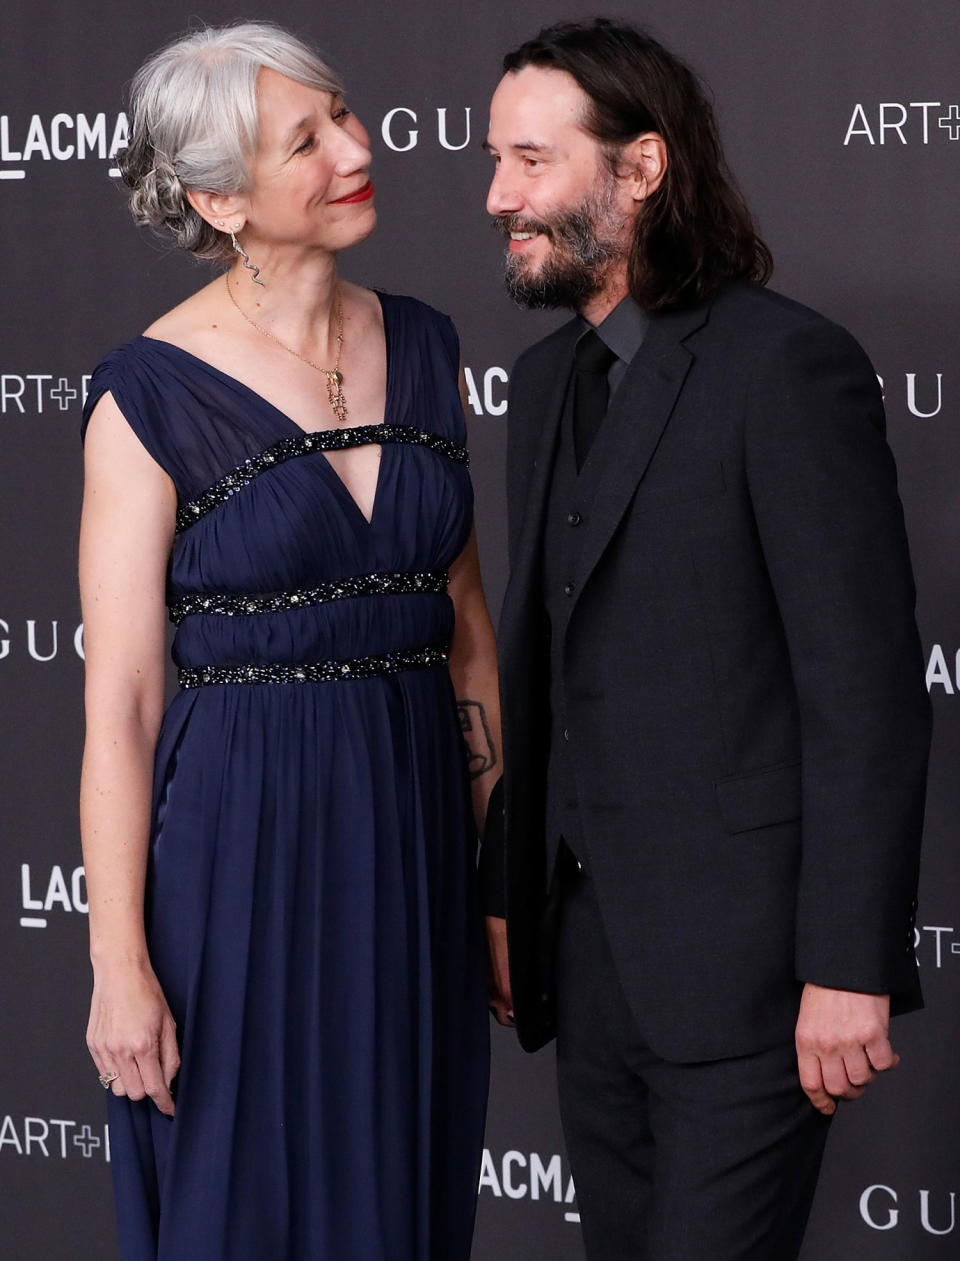 Alexandra Grant looks endearingly at Keanu Reeves as they attend the 2019 LACMA Art + Film Gala at LACMA in November 2019. (Taylor Hill / Getty Images)